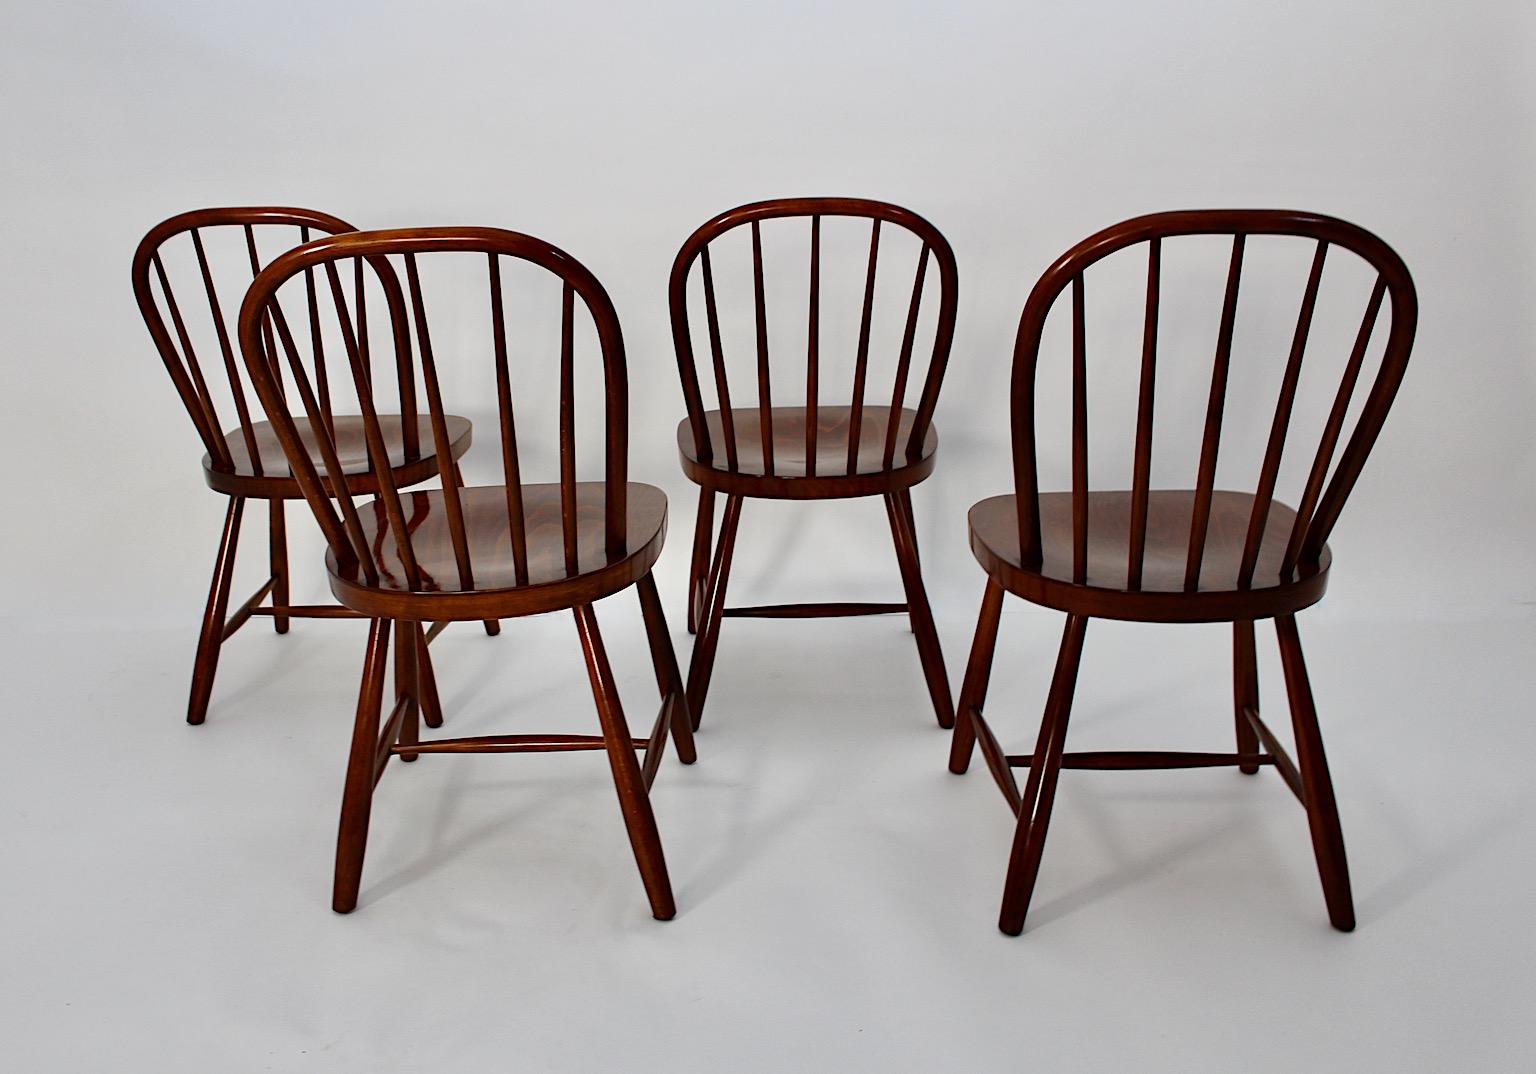 Art Deco Vintage Beech Windsor Dining Room Chairs Four Josef Frank 1920s Vienna For Sale 2